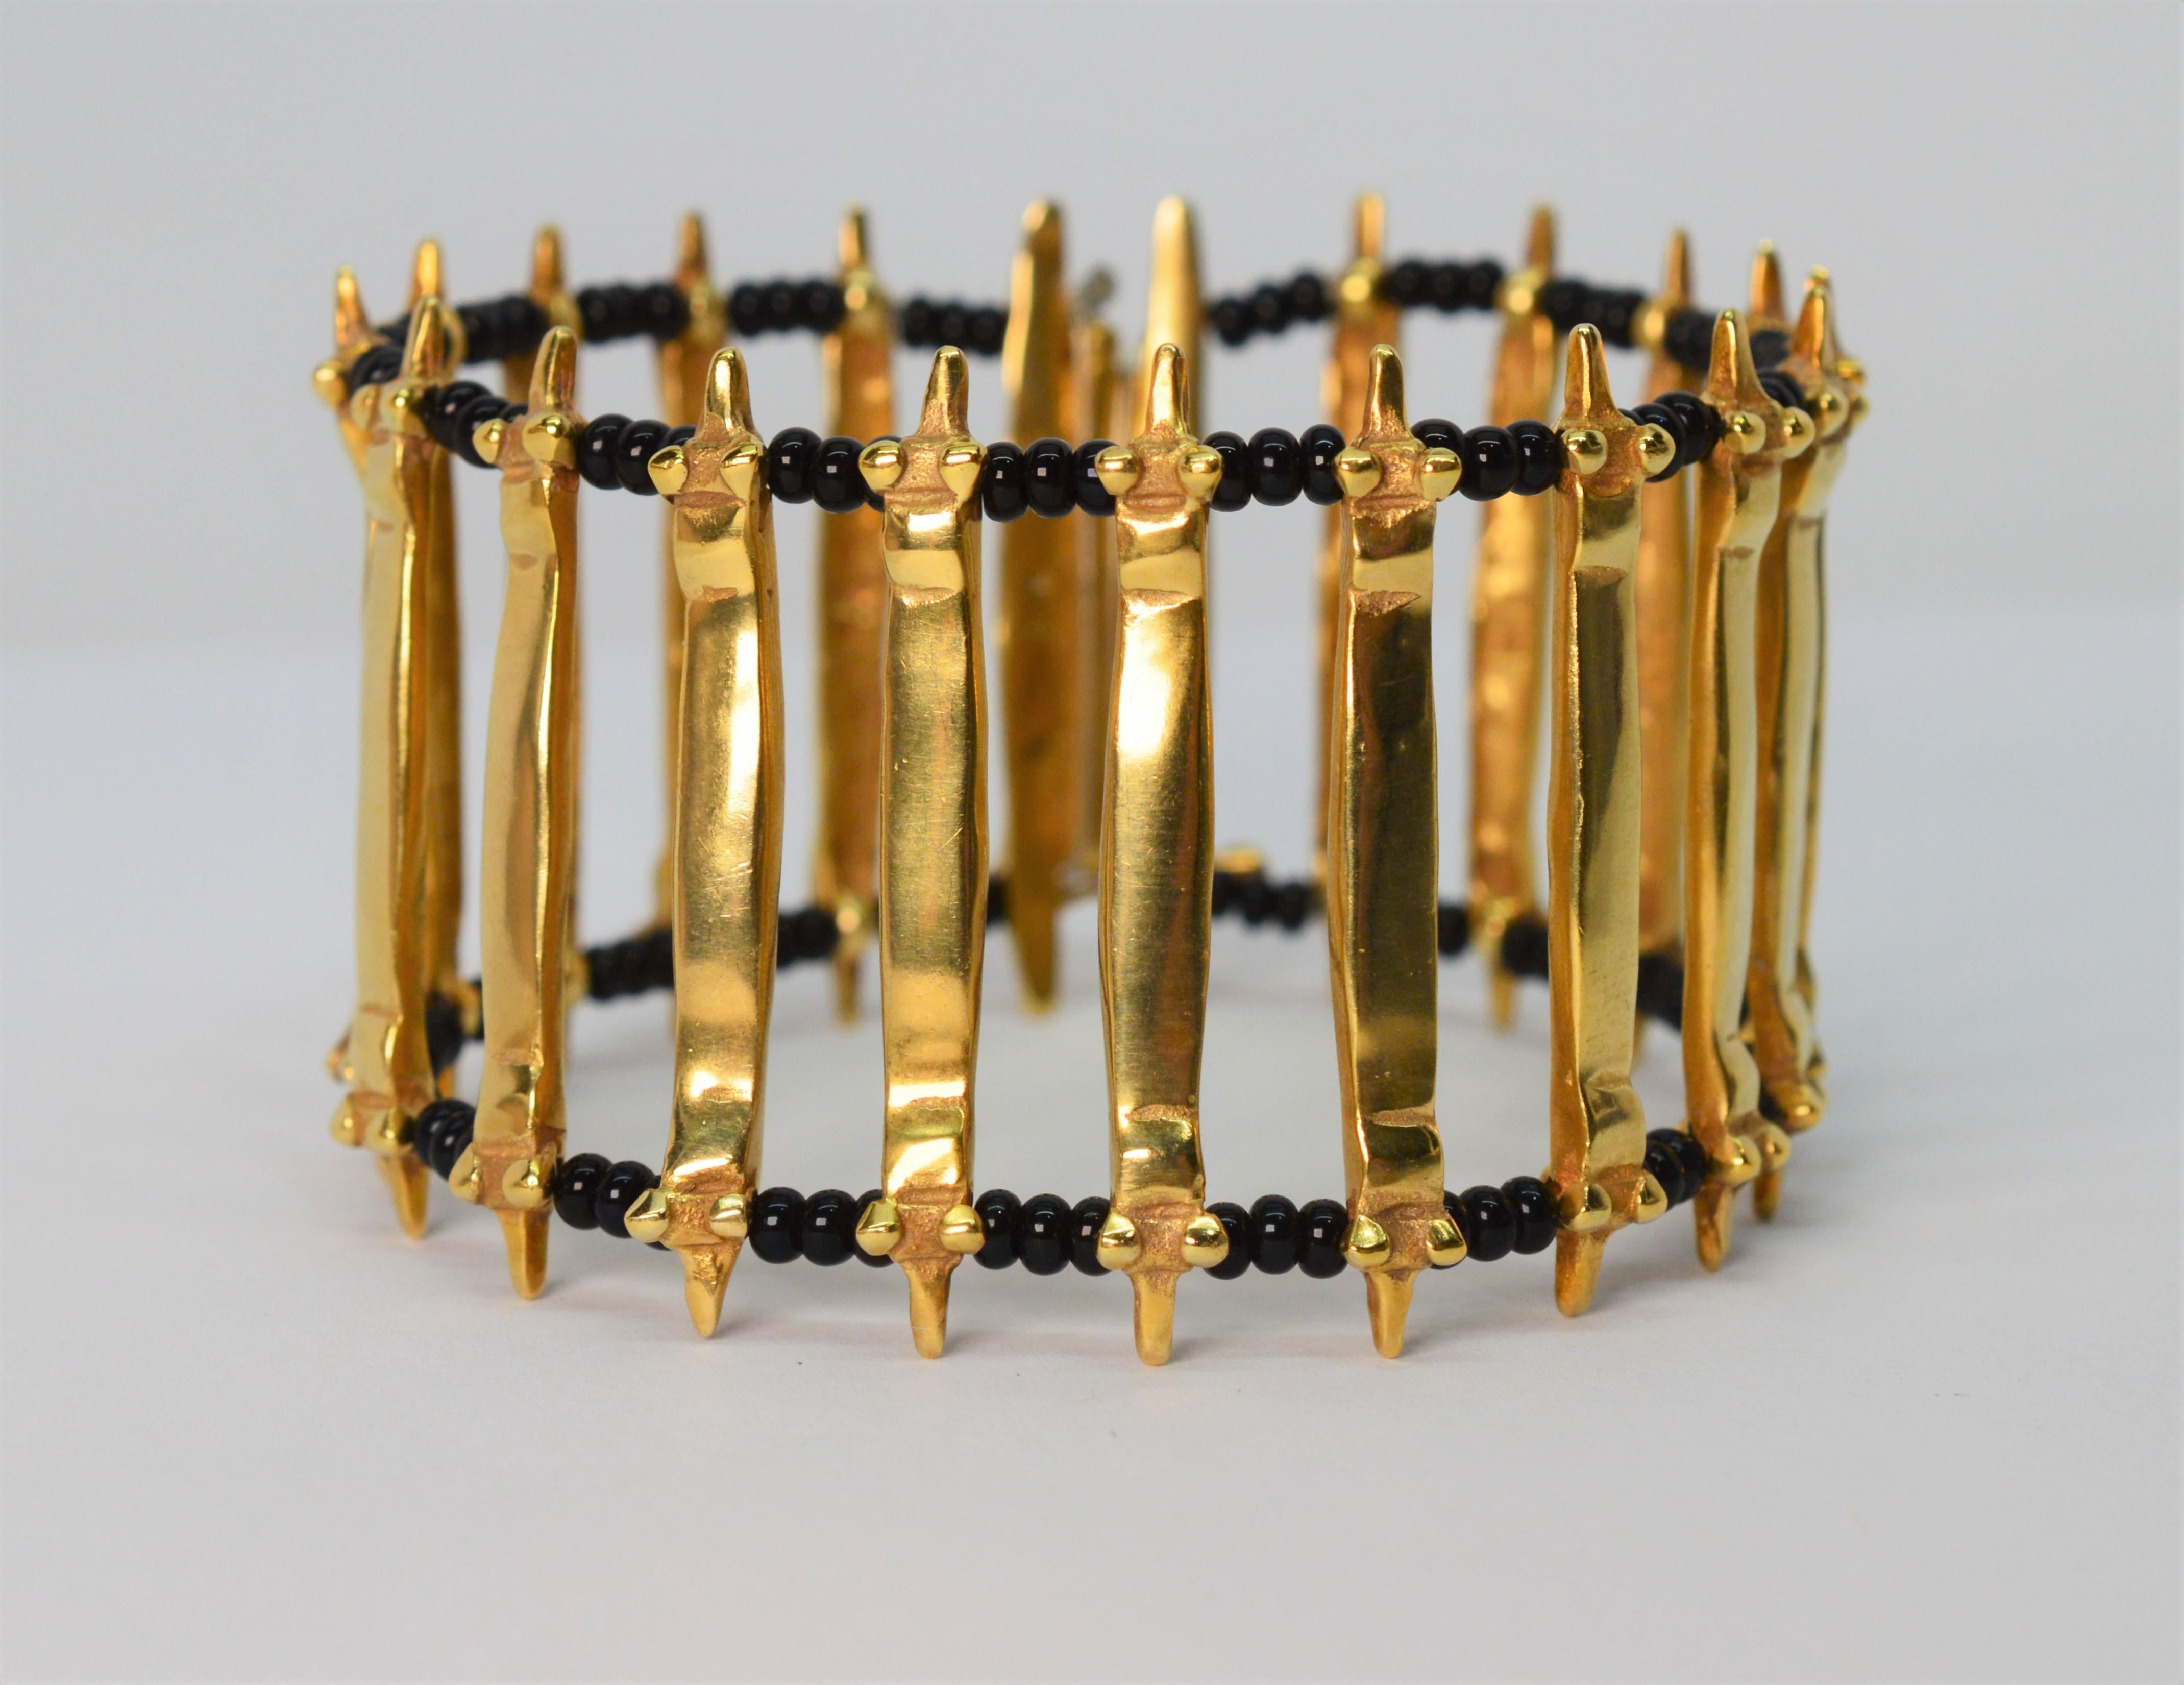 Craftsman overtones give this eighteen karat 18K yellow gold bracelet its unique rustic style. Architecturally inspired cast and hammered gold links are woven in a ladder pattern with contrasting black onyx beads to create a dramatic and defined